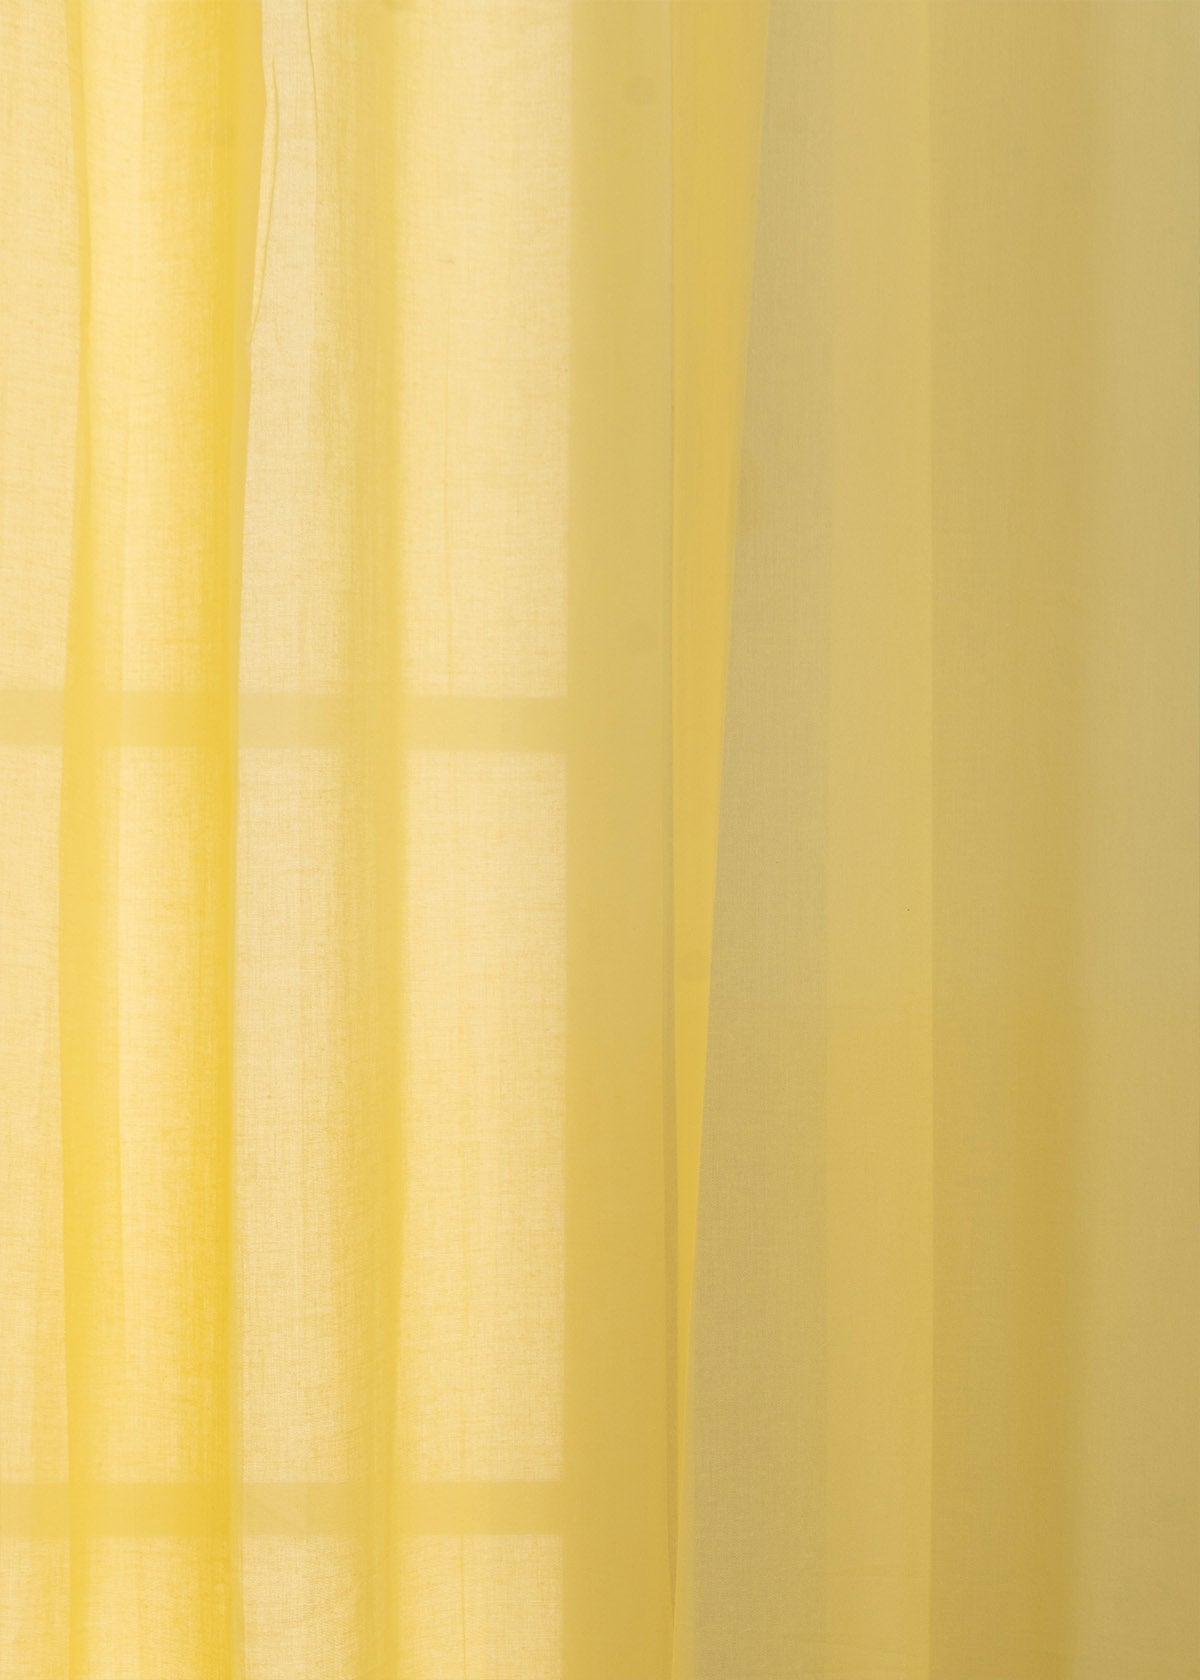 Solid Pale Yellow sheer 100% cotton plain curtain for Living room & bedroom - Light filtering - Pack of 1